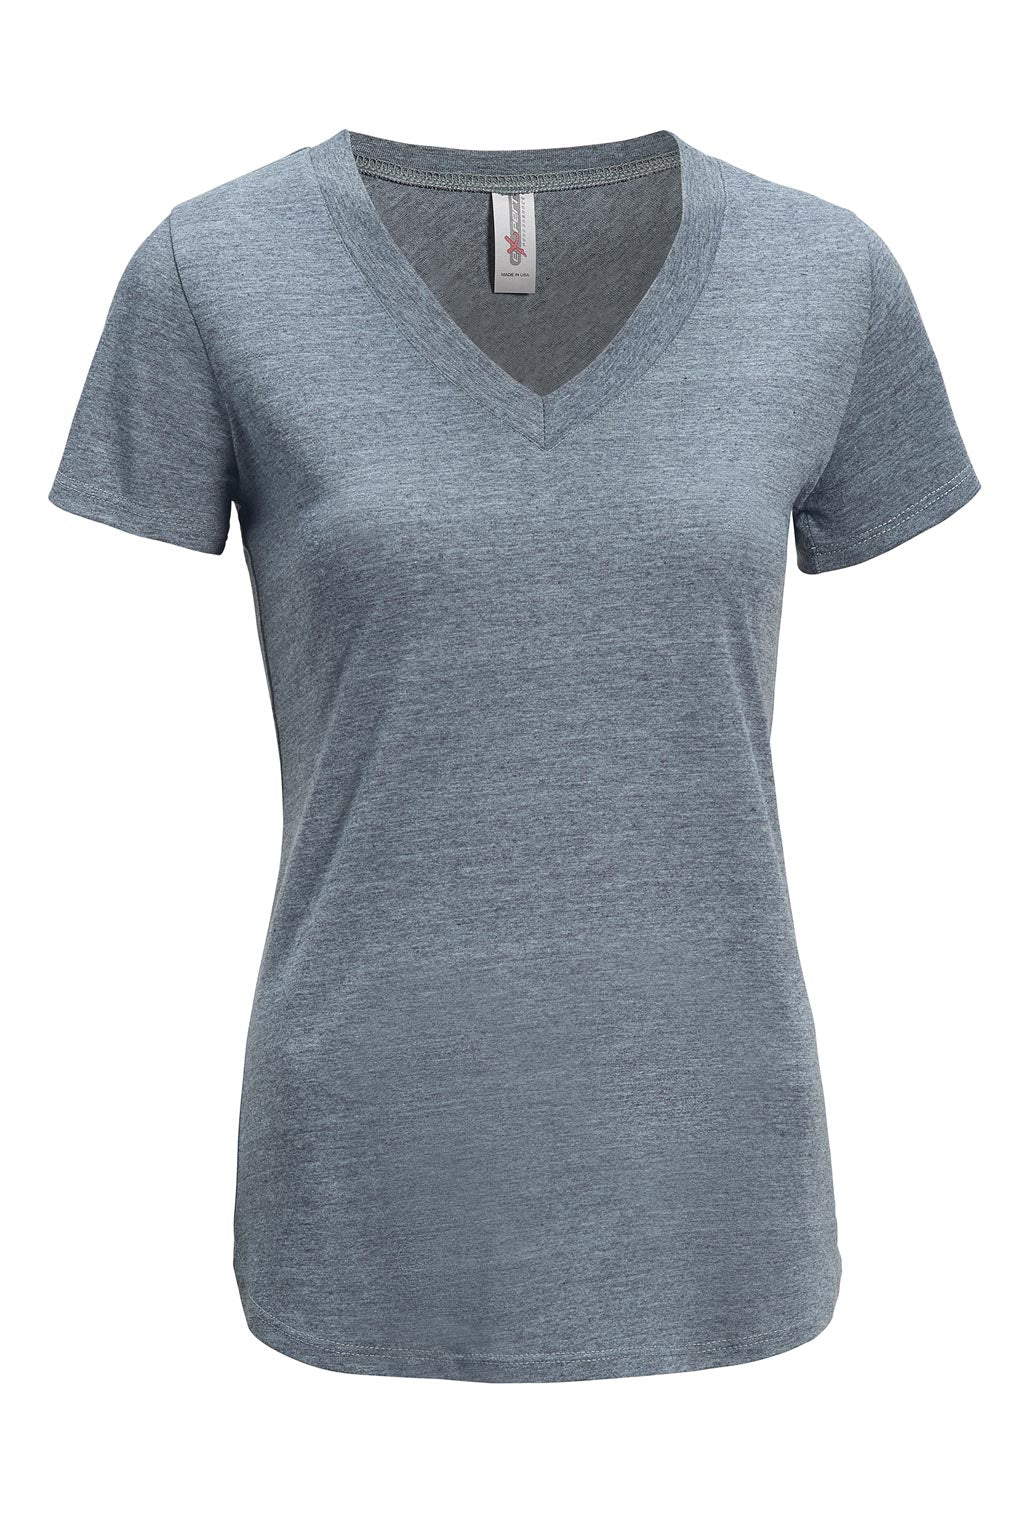 Expert Brand Wholesale Made in USA Women's Tritec Triblend V-Neck Tee in Charcoal#charcoal